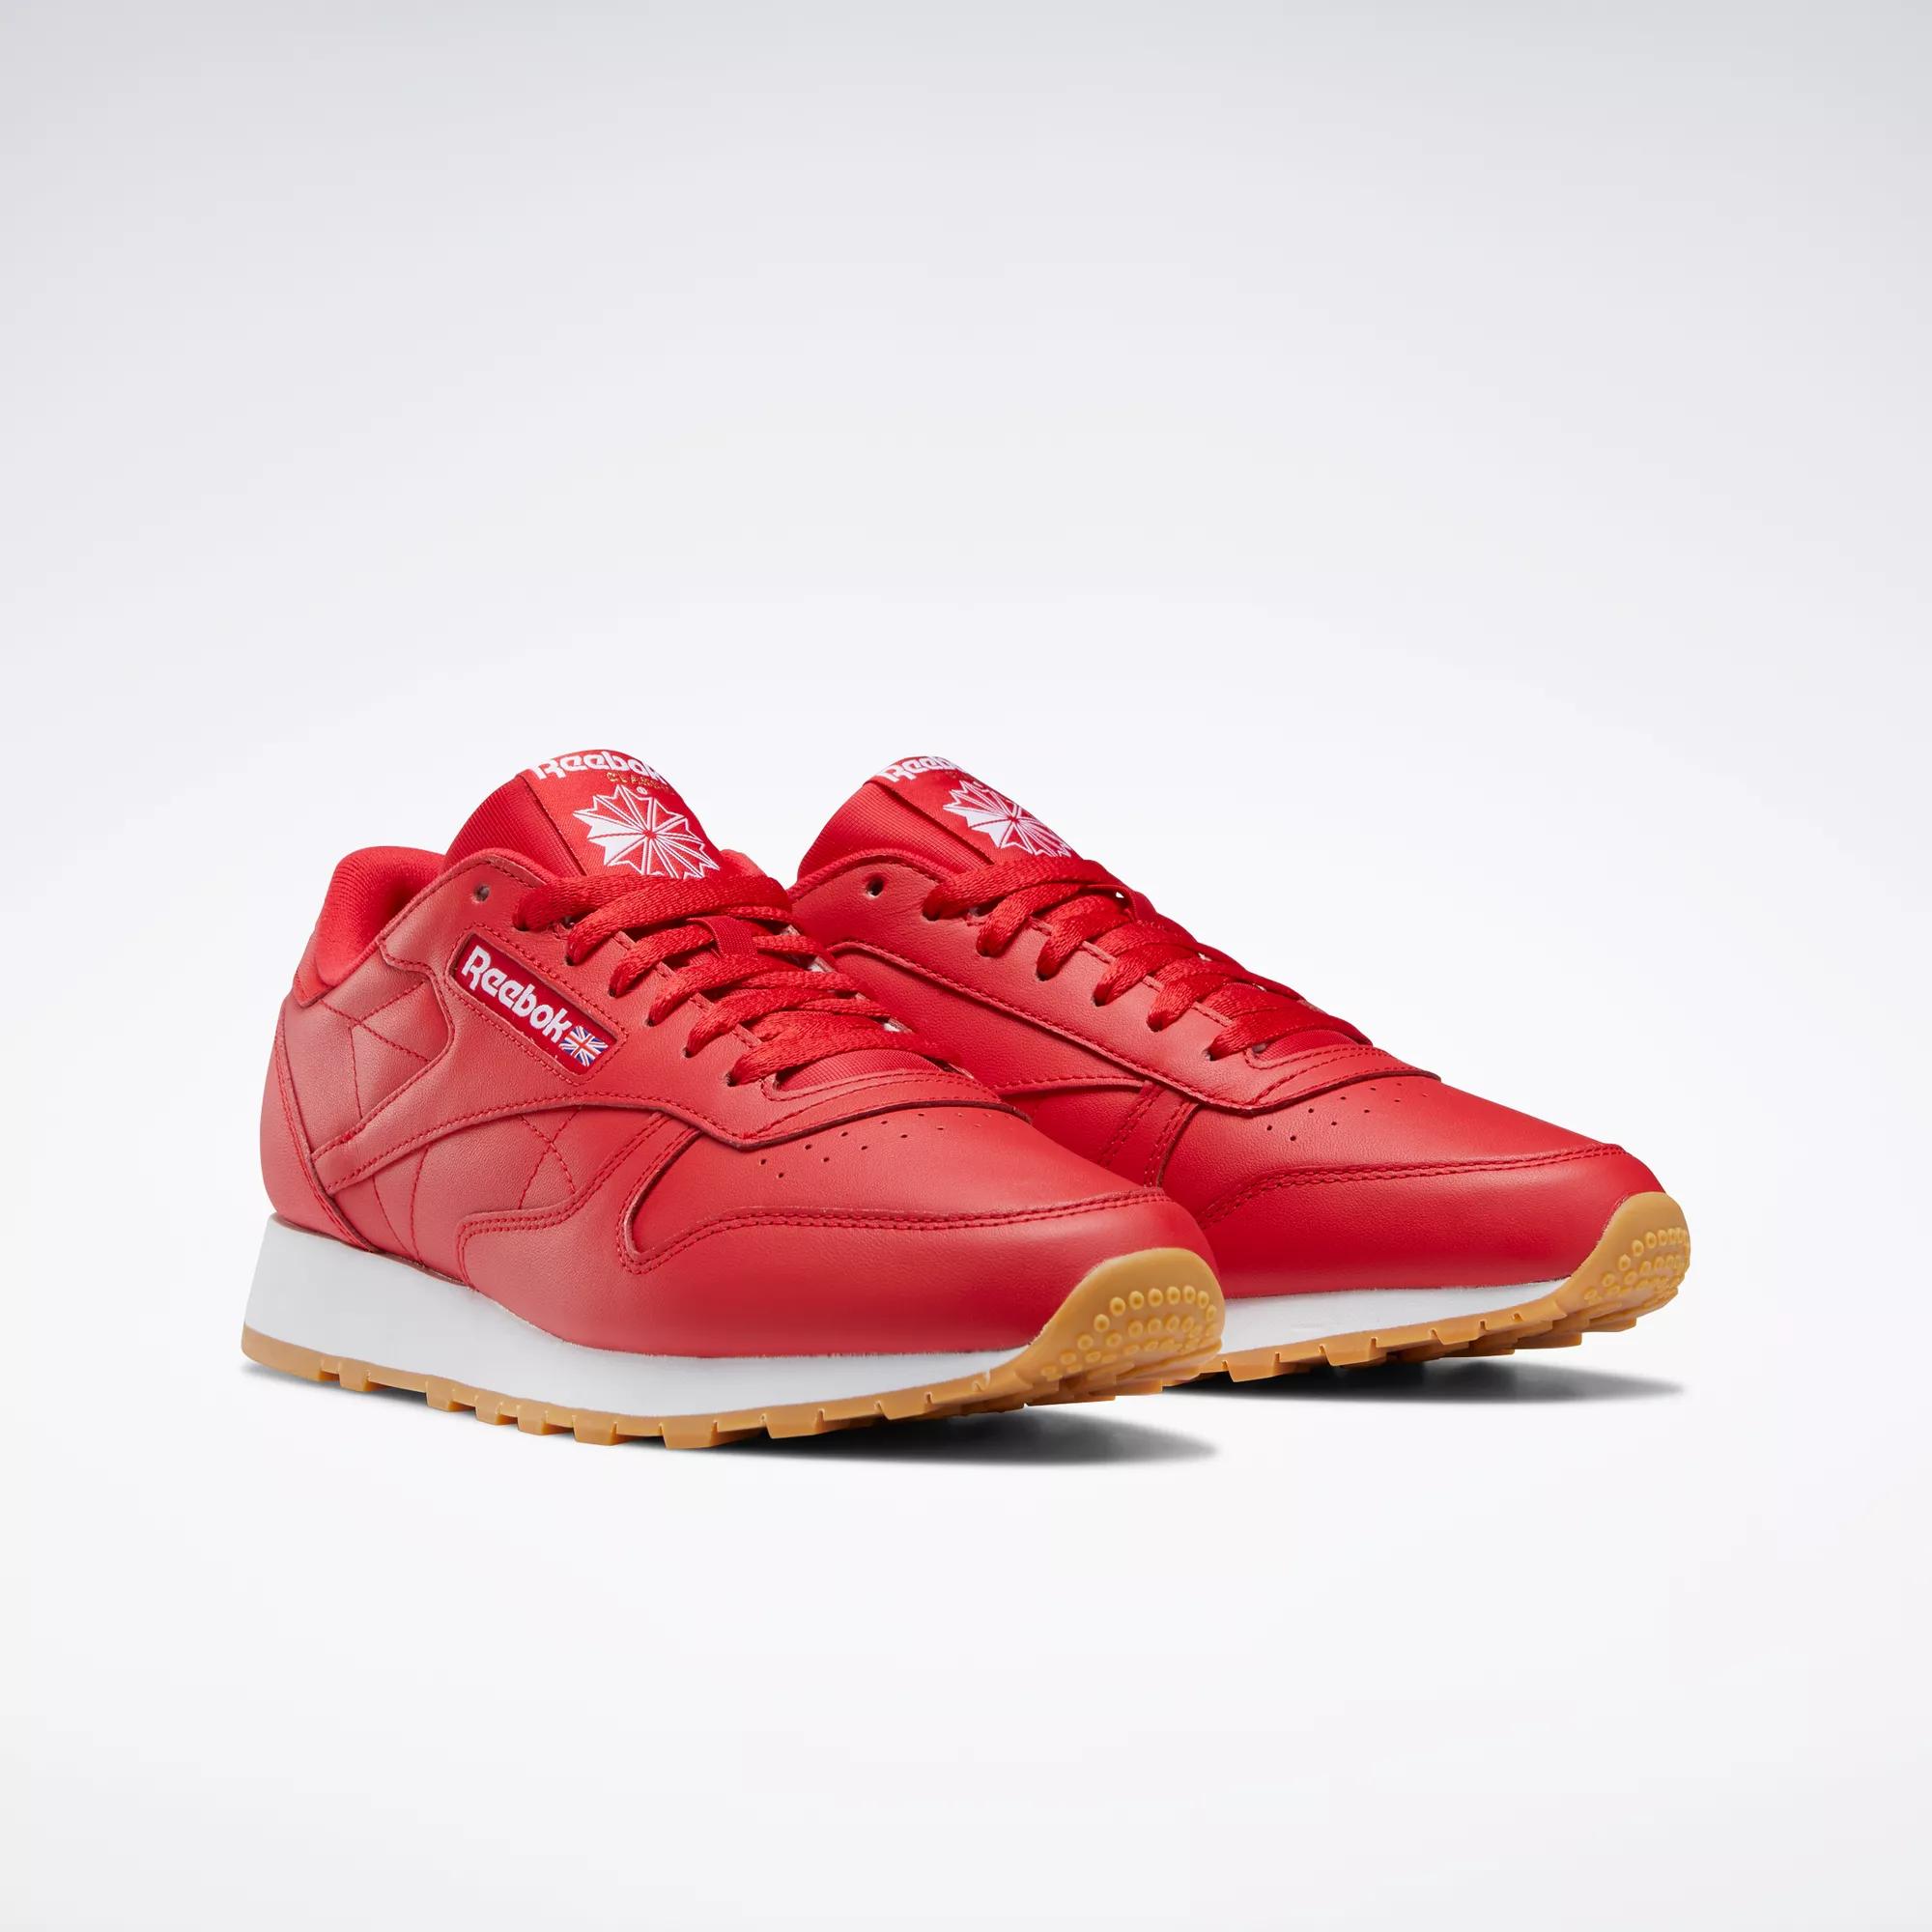 noedels overschreden stikstof Classic Leather Shoes - Vector Red / Ftwr White / Reebok Rubber Gum-03 |  Reebok